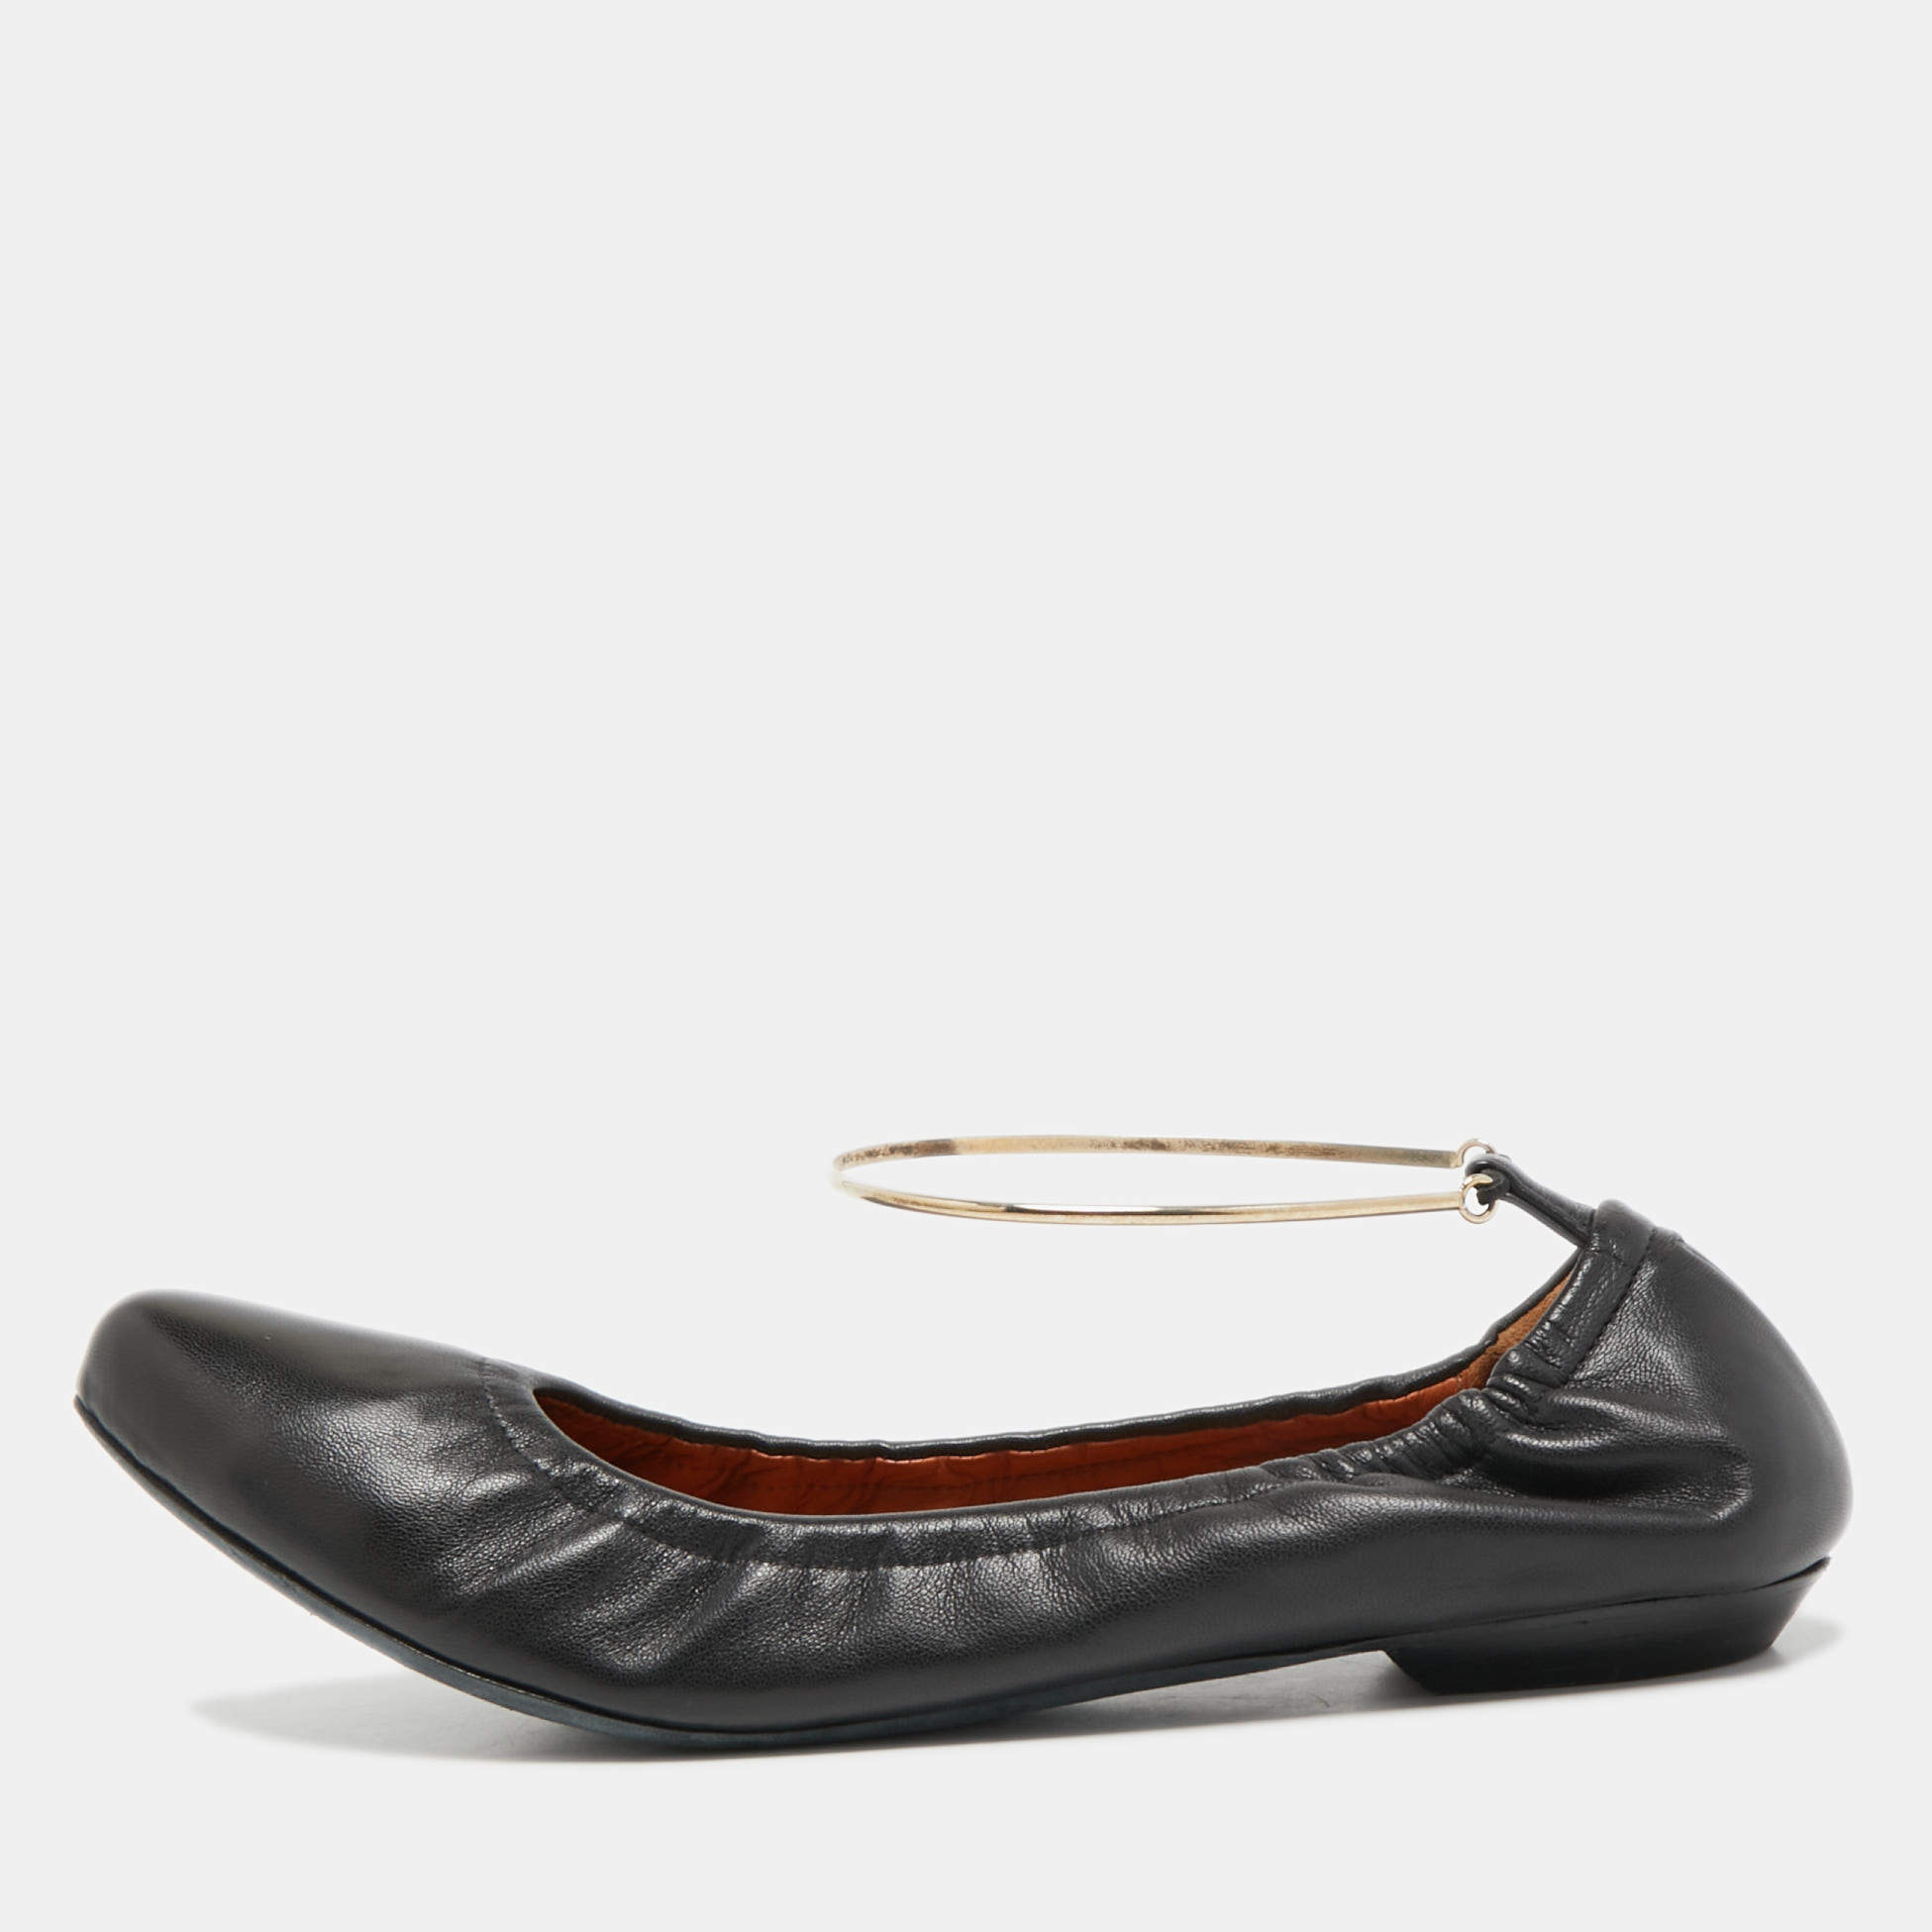 Givenchy Black Leather Scrunch Ankle Cuff Ballet Flats Size 40 Givenchy ...